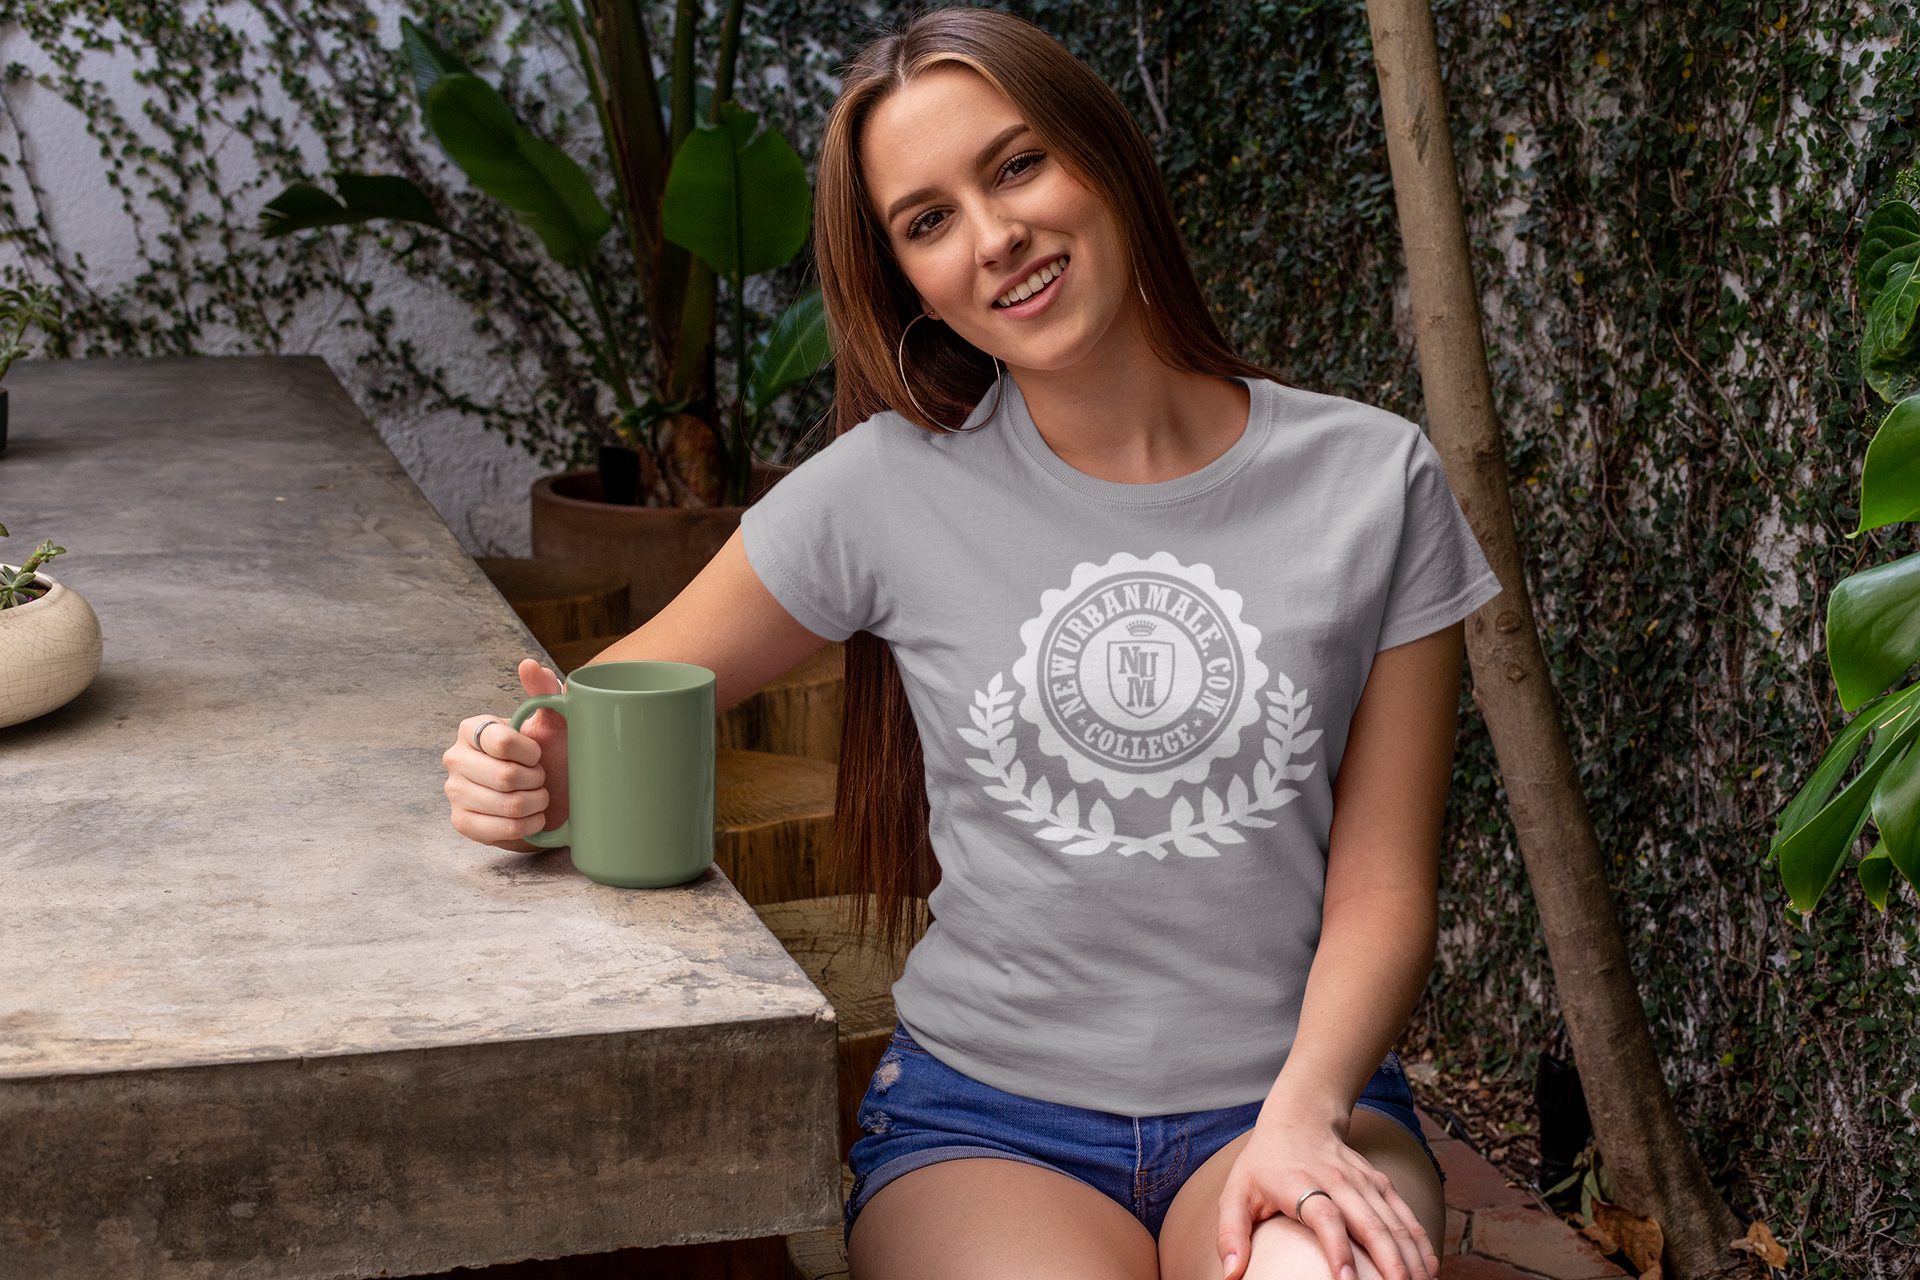 mockup-of-a-long-haired-woman-wearing-a-t-shirt-and-holding-a-15-oz-mug-in-her-backyard-27511.png